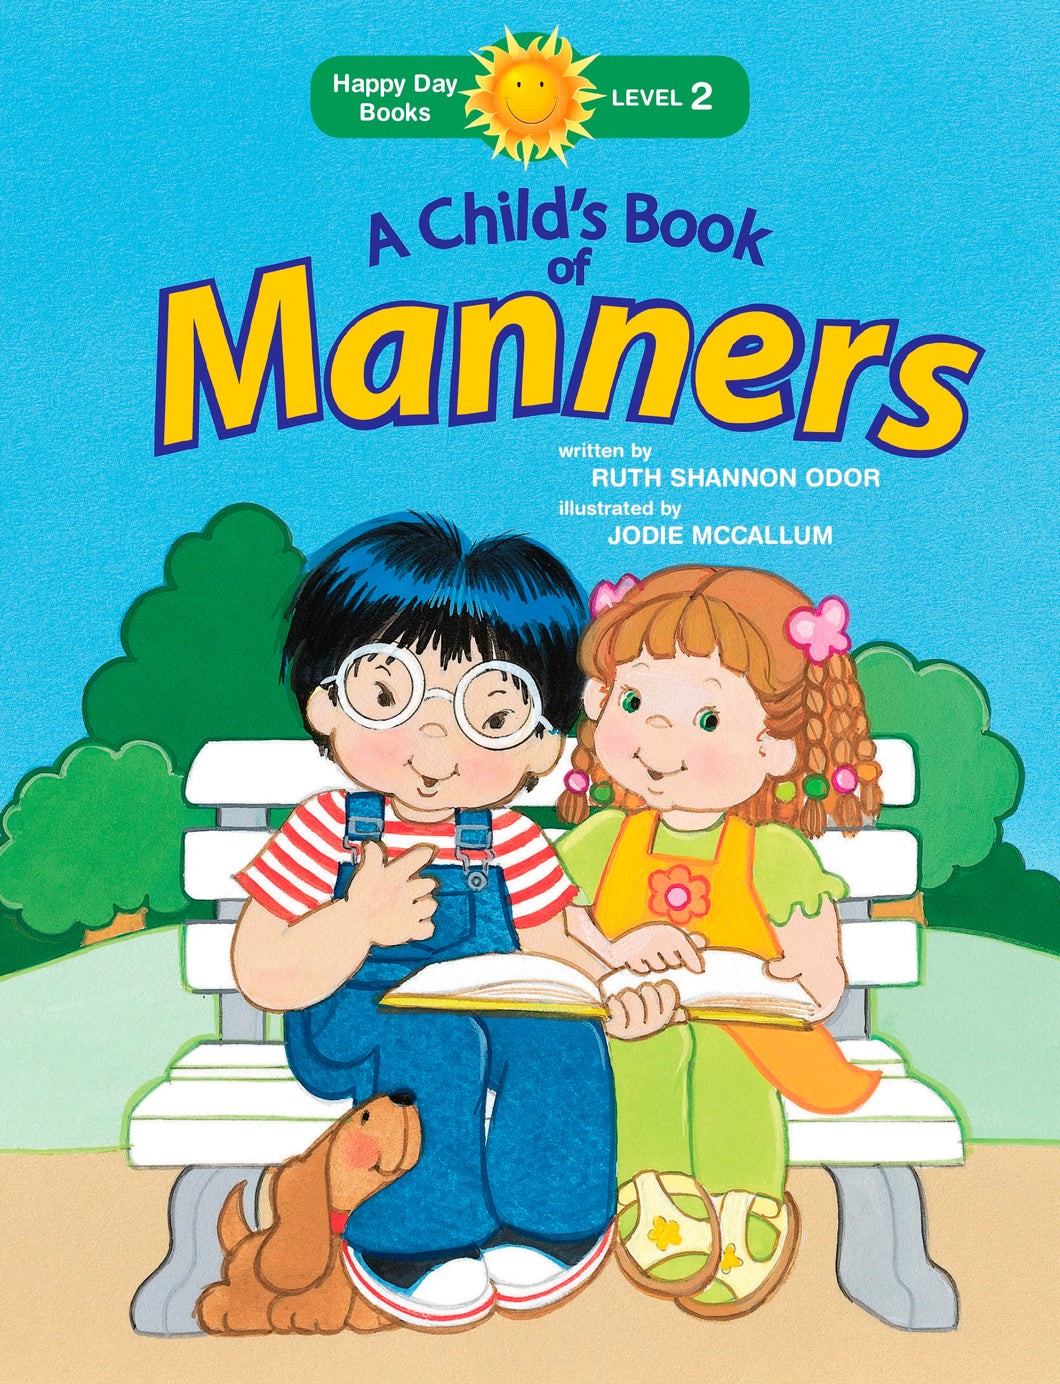 A Child's Book Of Manners (Happy Day Books)